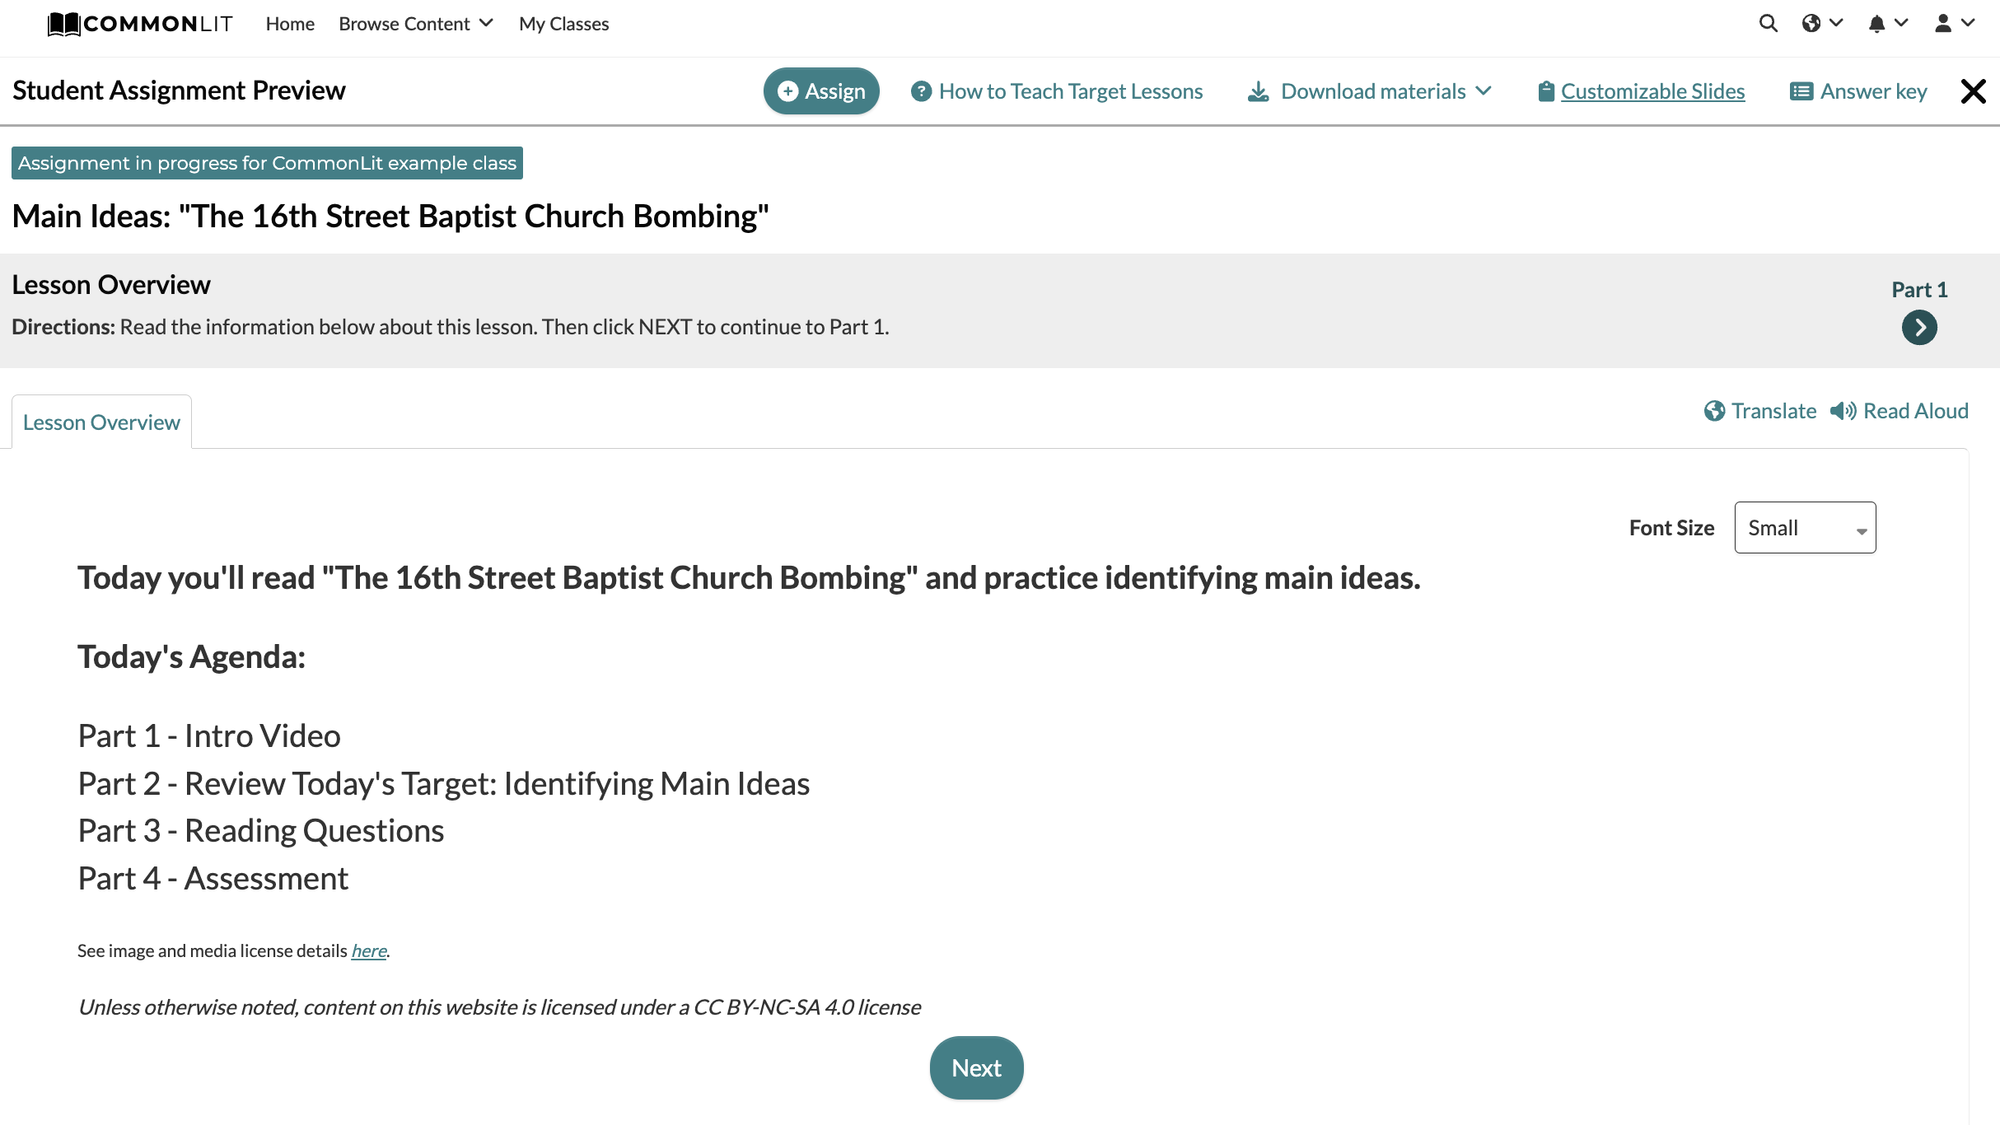 Target section for "16th Street Baptist Church Bombing" lesson